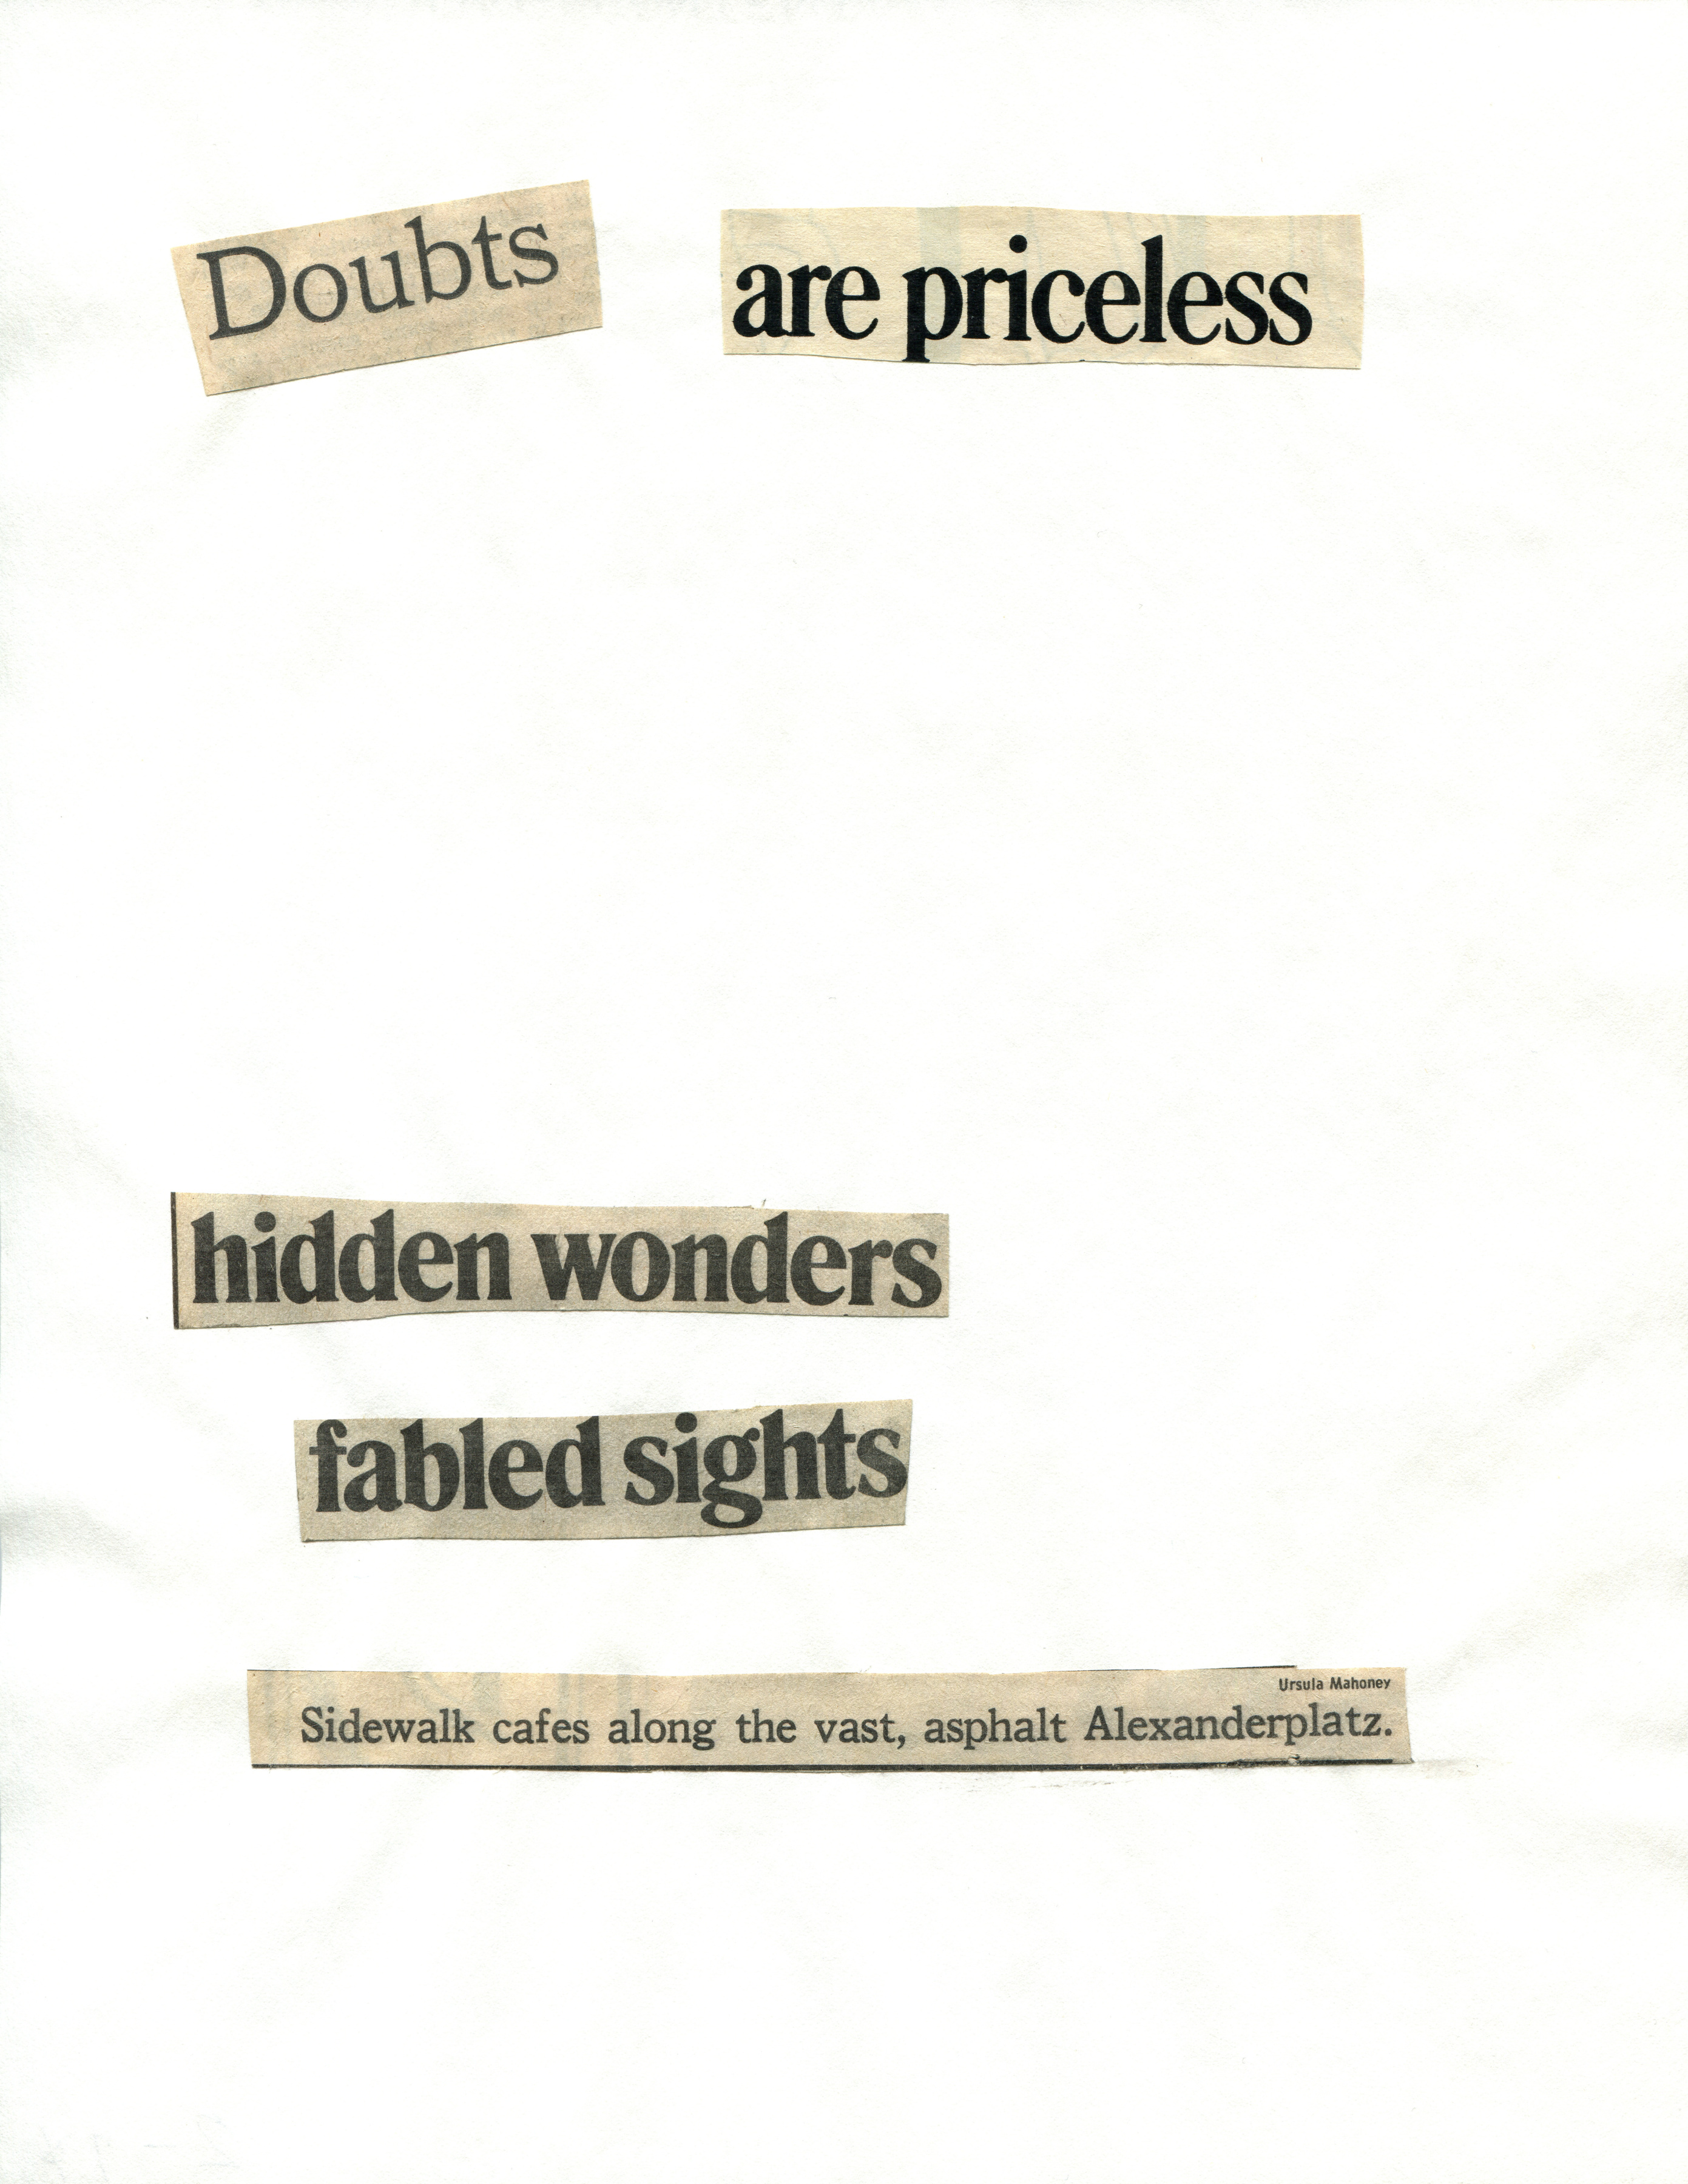 Cutting Out The New York Times, A Conversation with Fata Morgana,&nbsp;1977, Part 7 of 8, Toner ink on adhesive paper,&nbsp;11.02h x 7.87w in (27.99h x 19.99w cm)